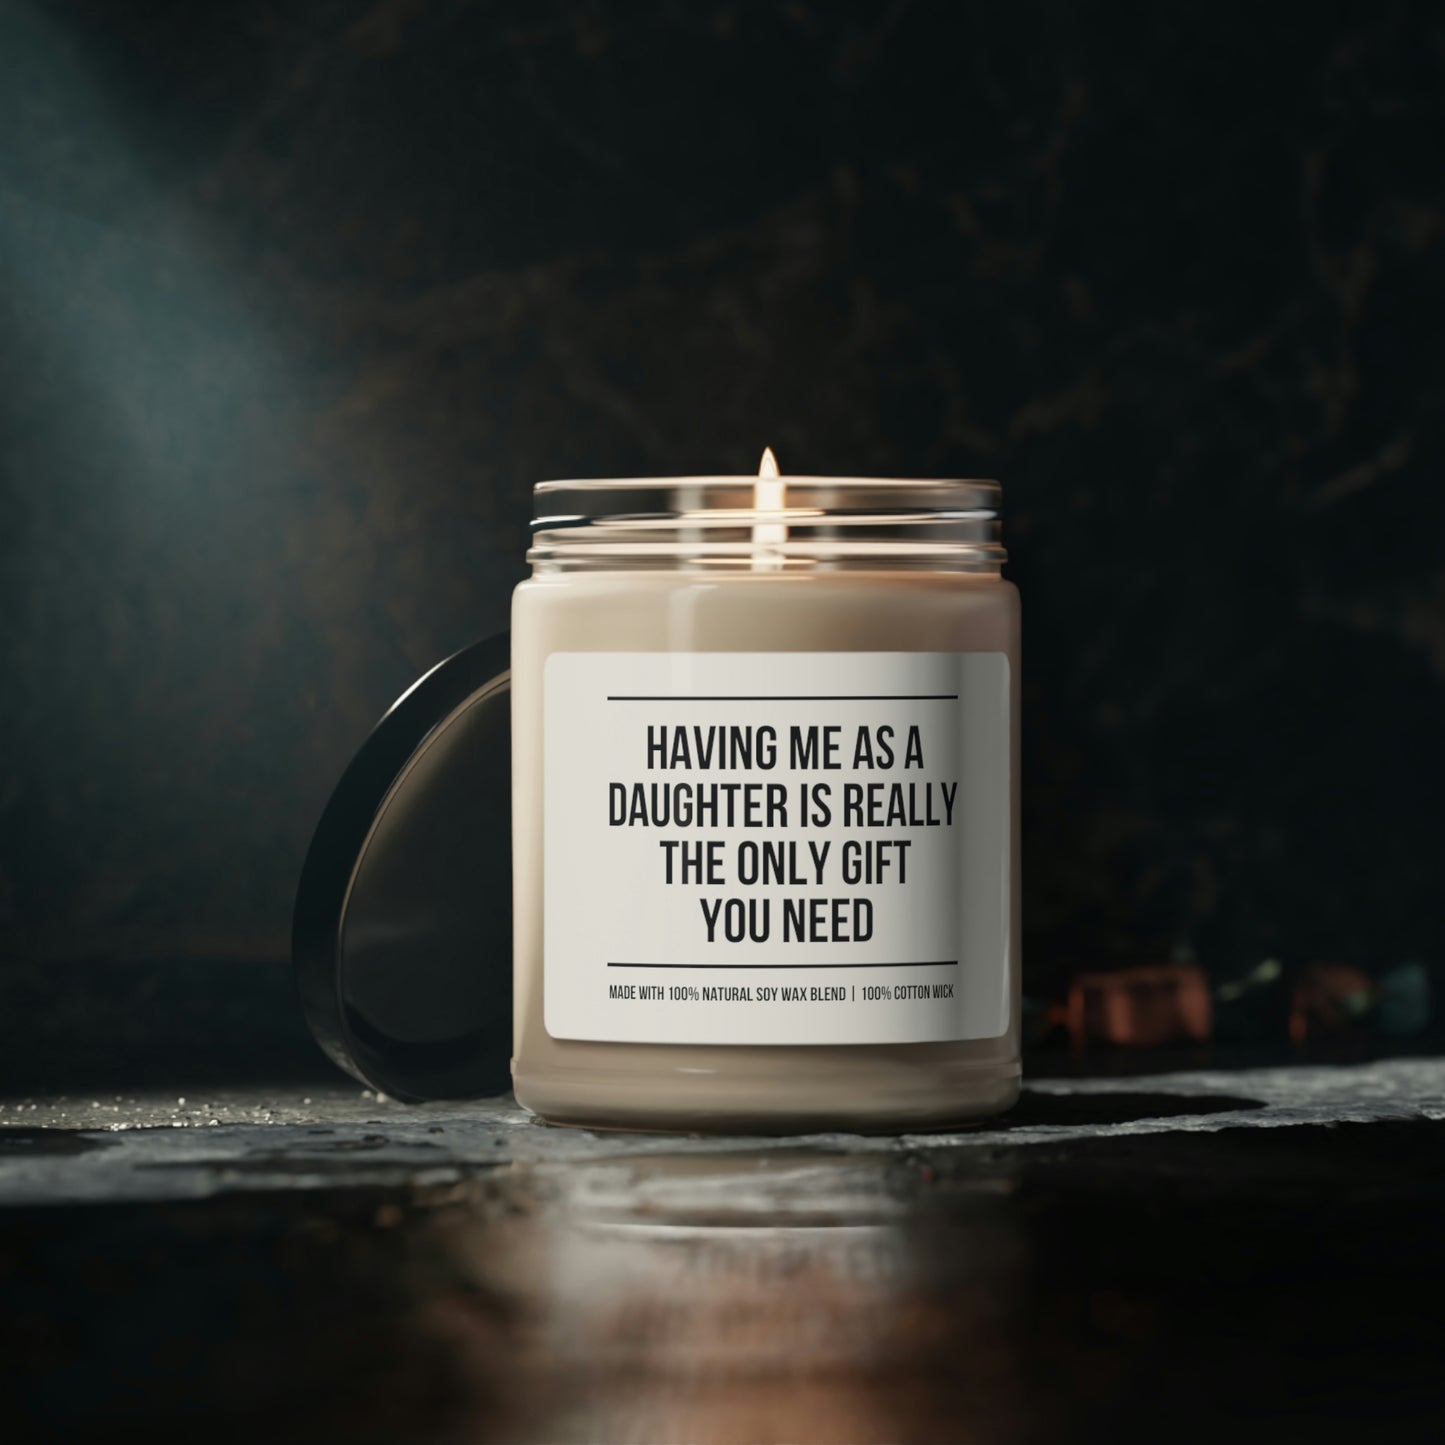 Having me as a daughter...| Scented Soy Candle, 9oz